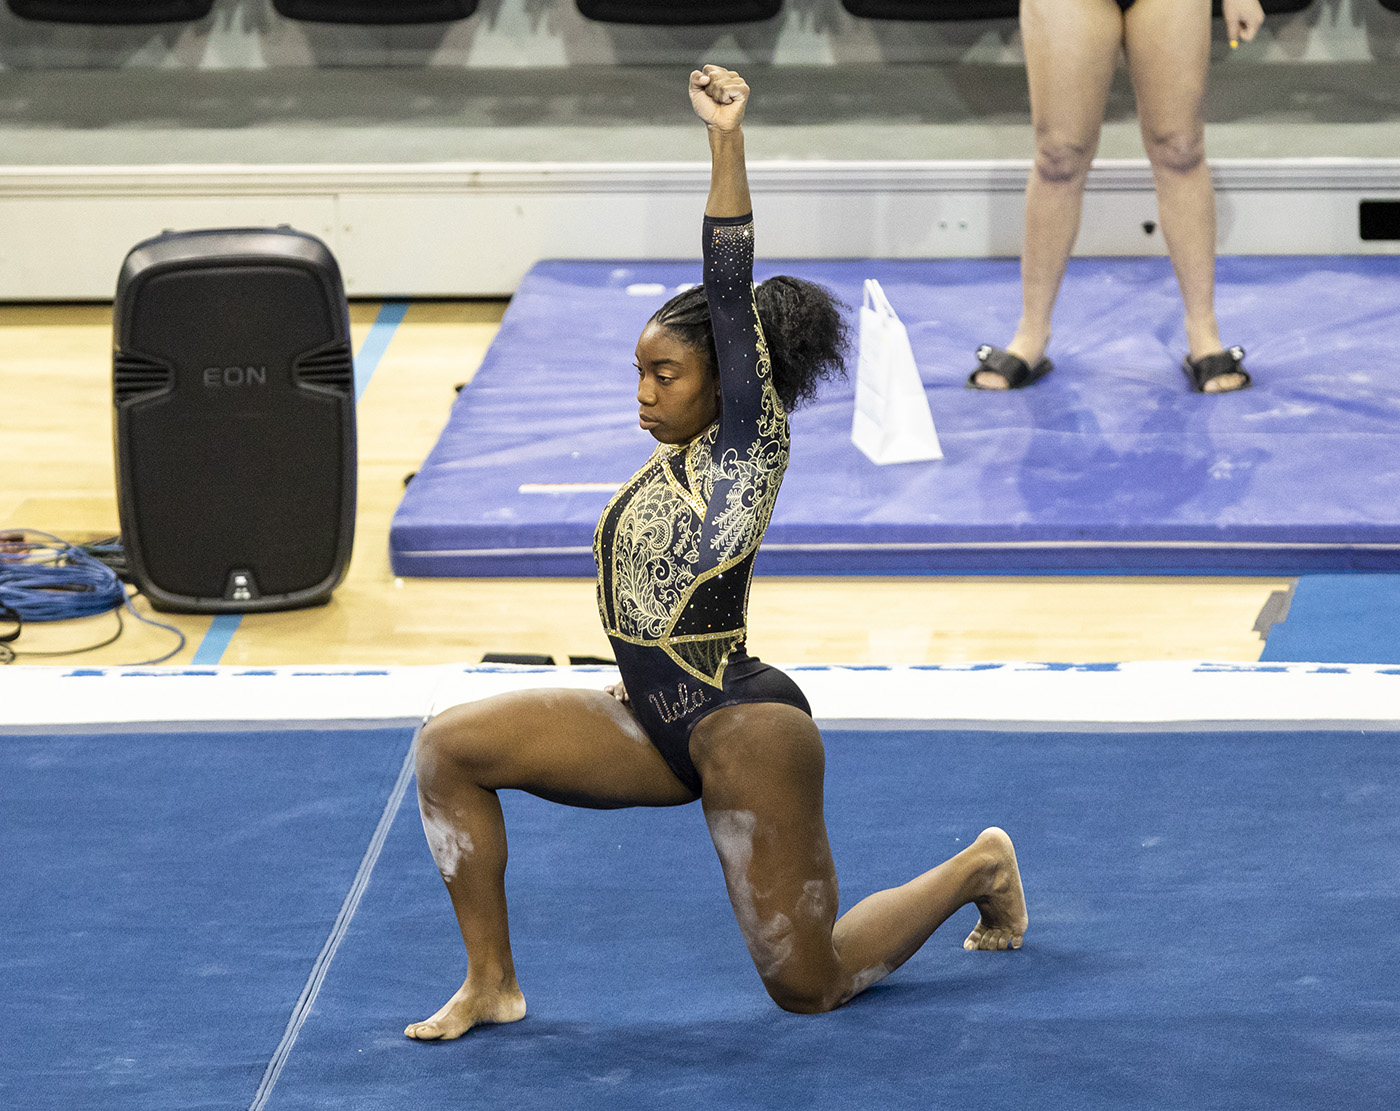 Black Woman Owned Company Blazing the Trail in the Gymnastics